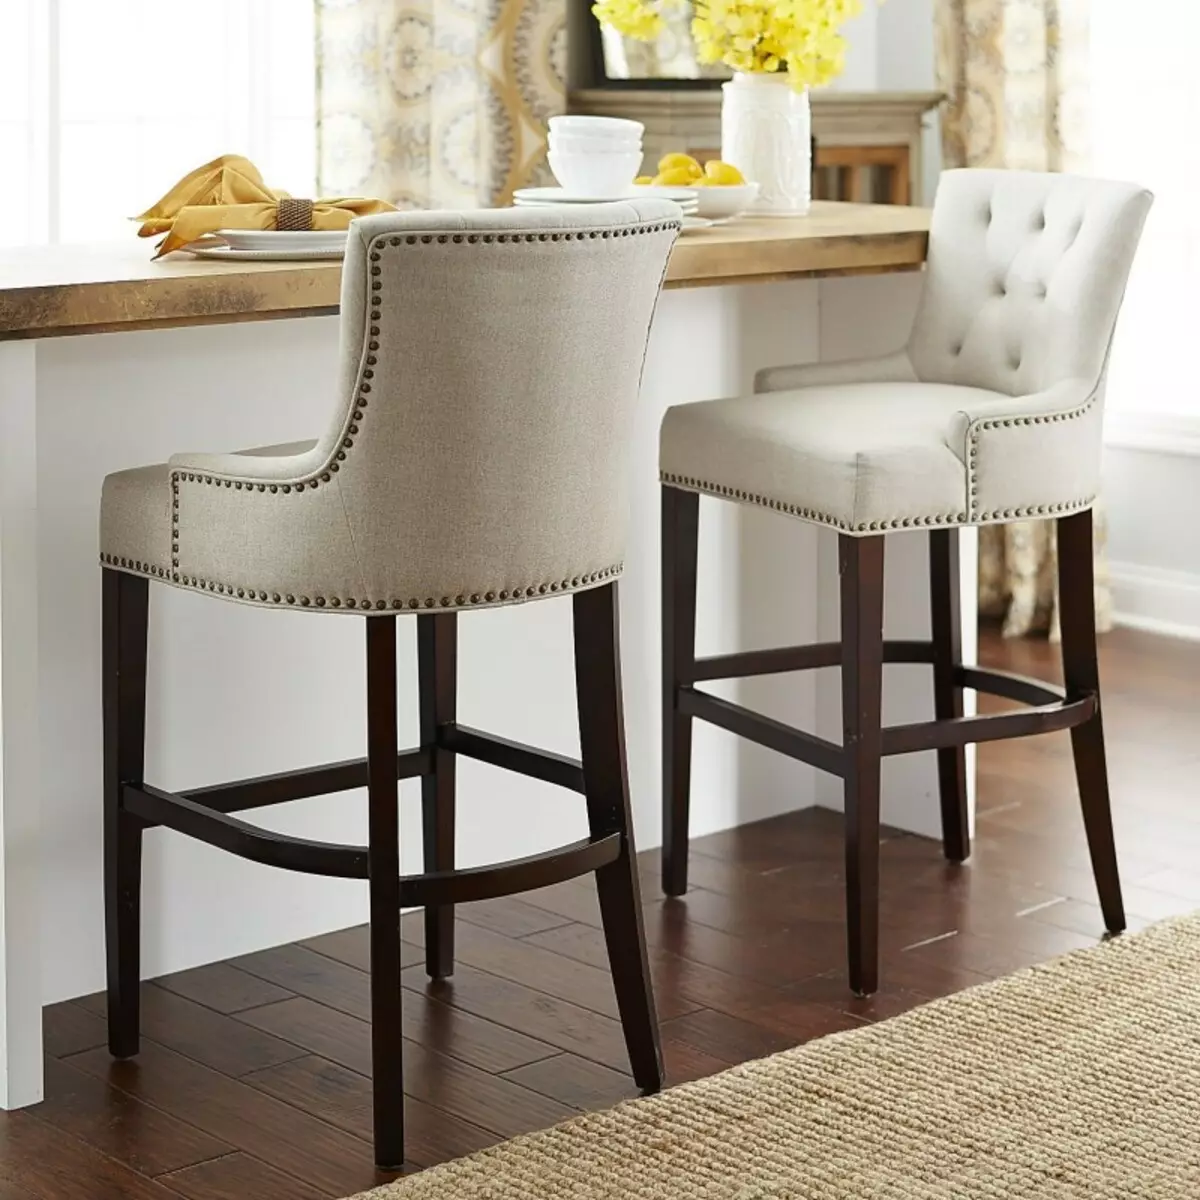 Soft chairs for the living room: Chair-chairs features, soft back and armrest models and other options 9751_13